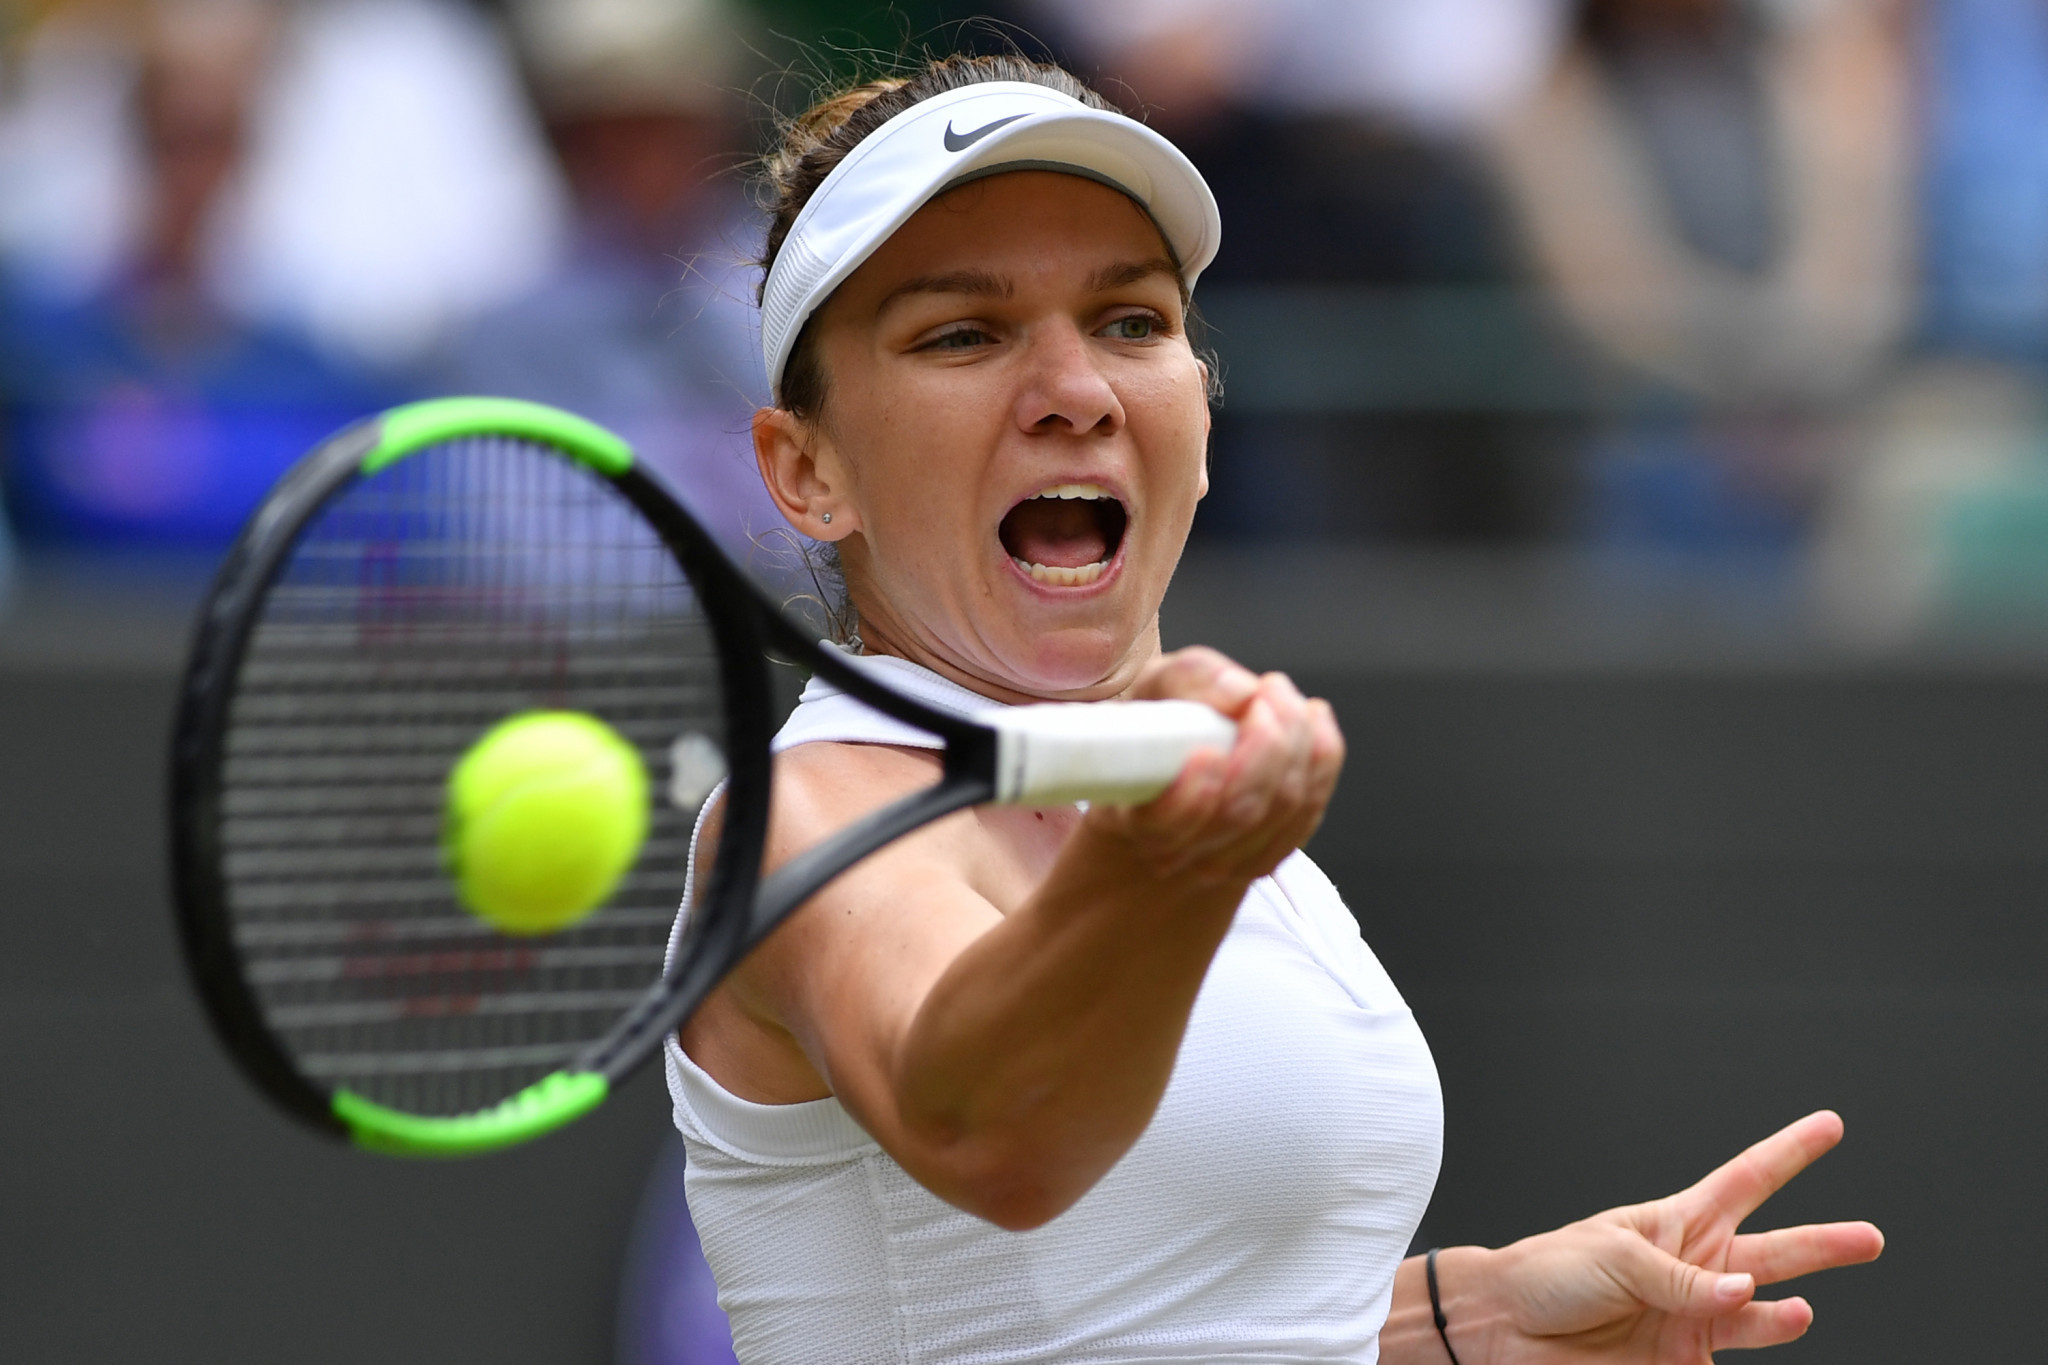 Romania's Simona Halep is through to the last four after defeating China's Zhang Shuai 7-6, 6-1 ©Getty Images